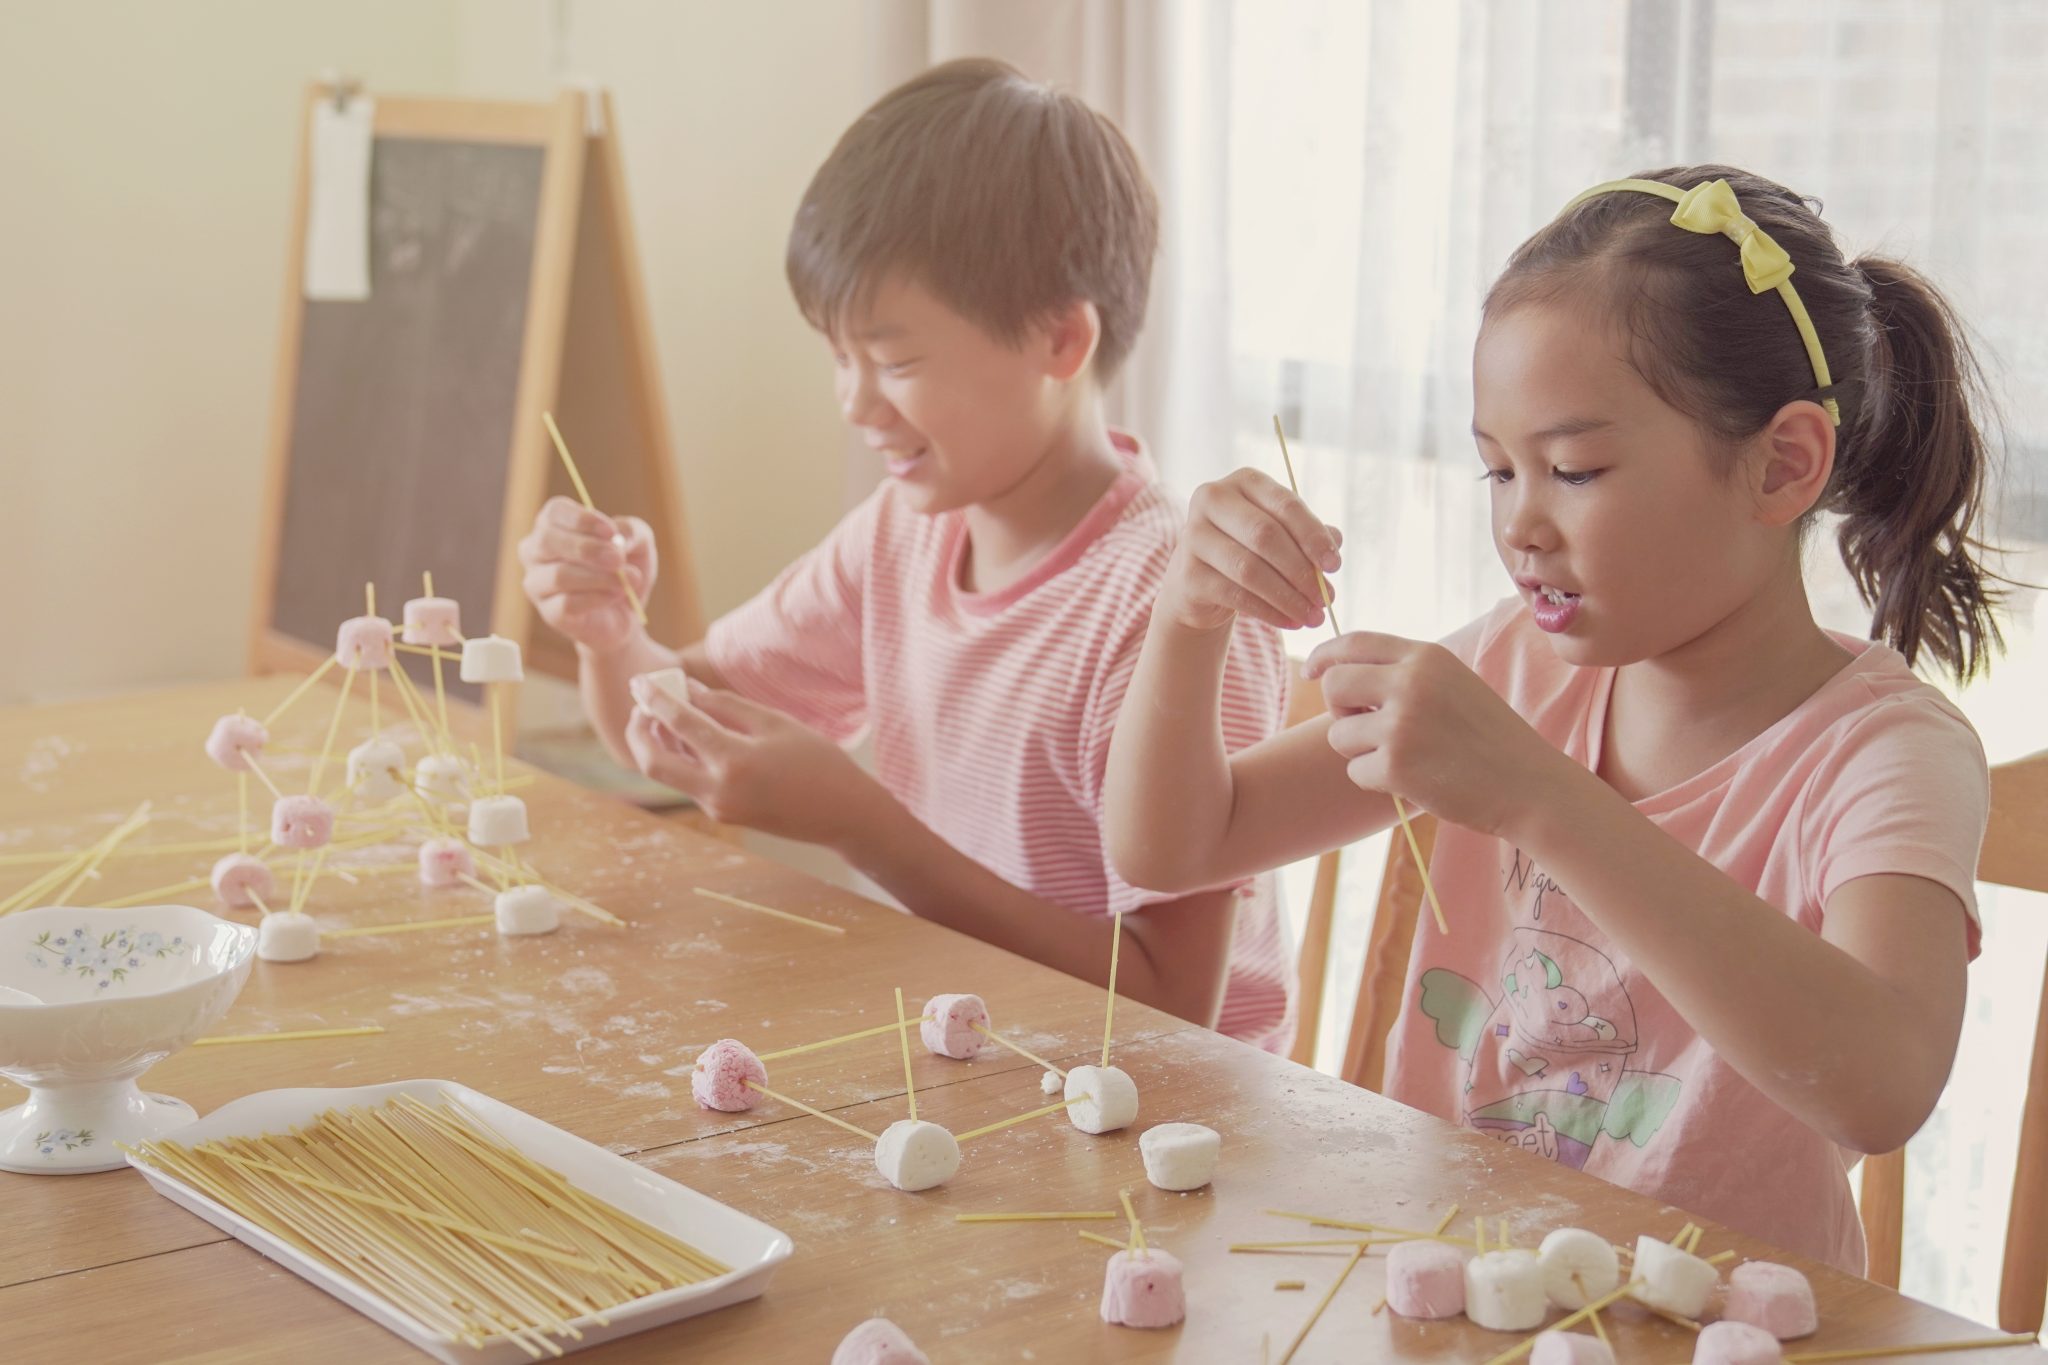 Two young Asian children building marshmallow towers